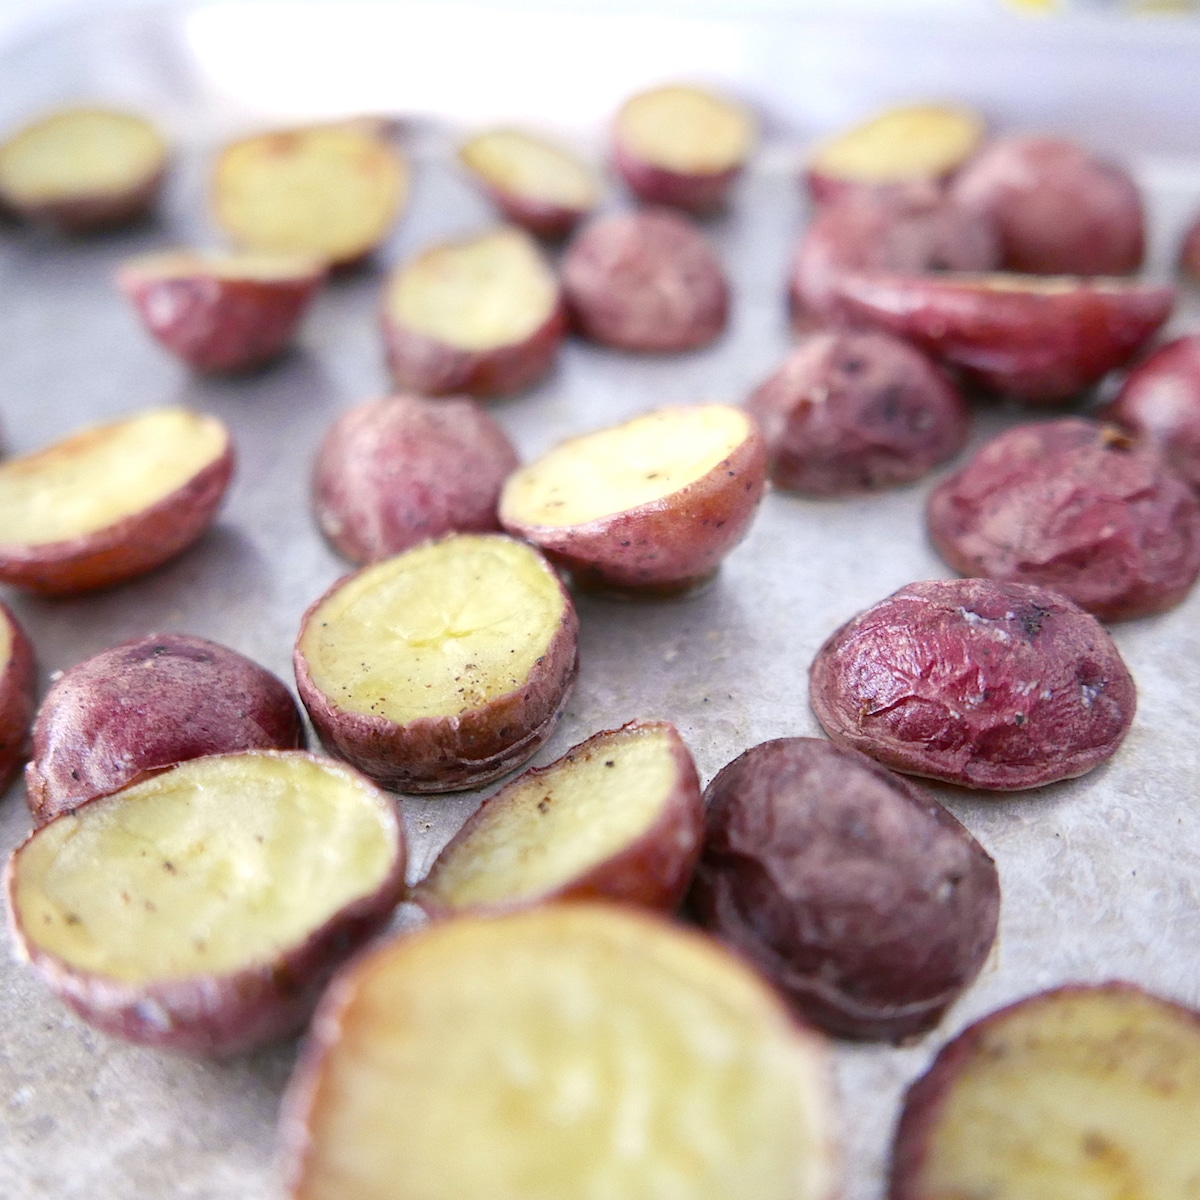 Roasted red potatoes spread out on a baking sheet.